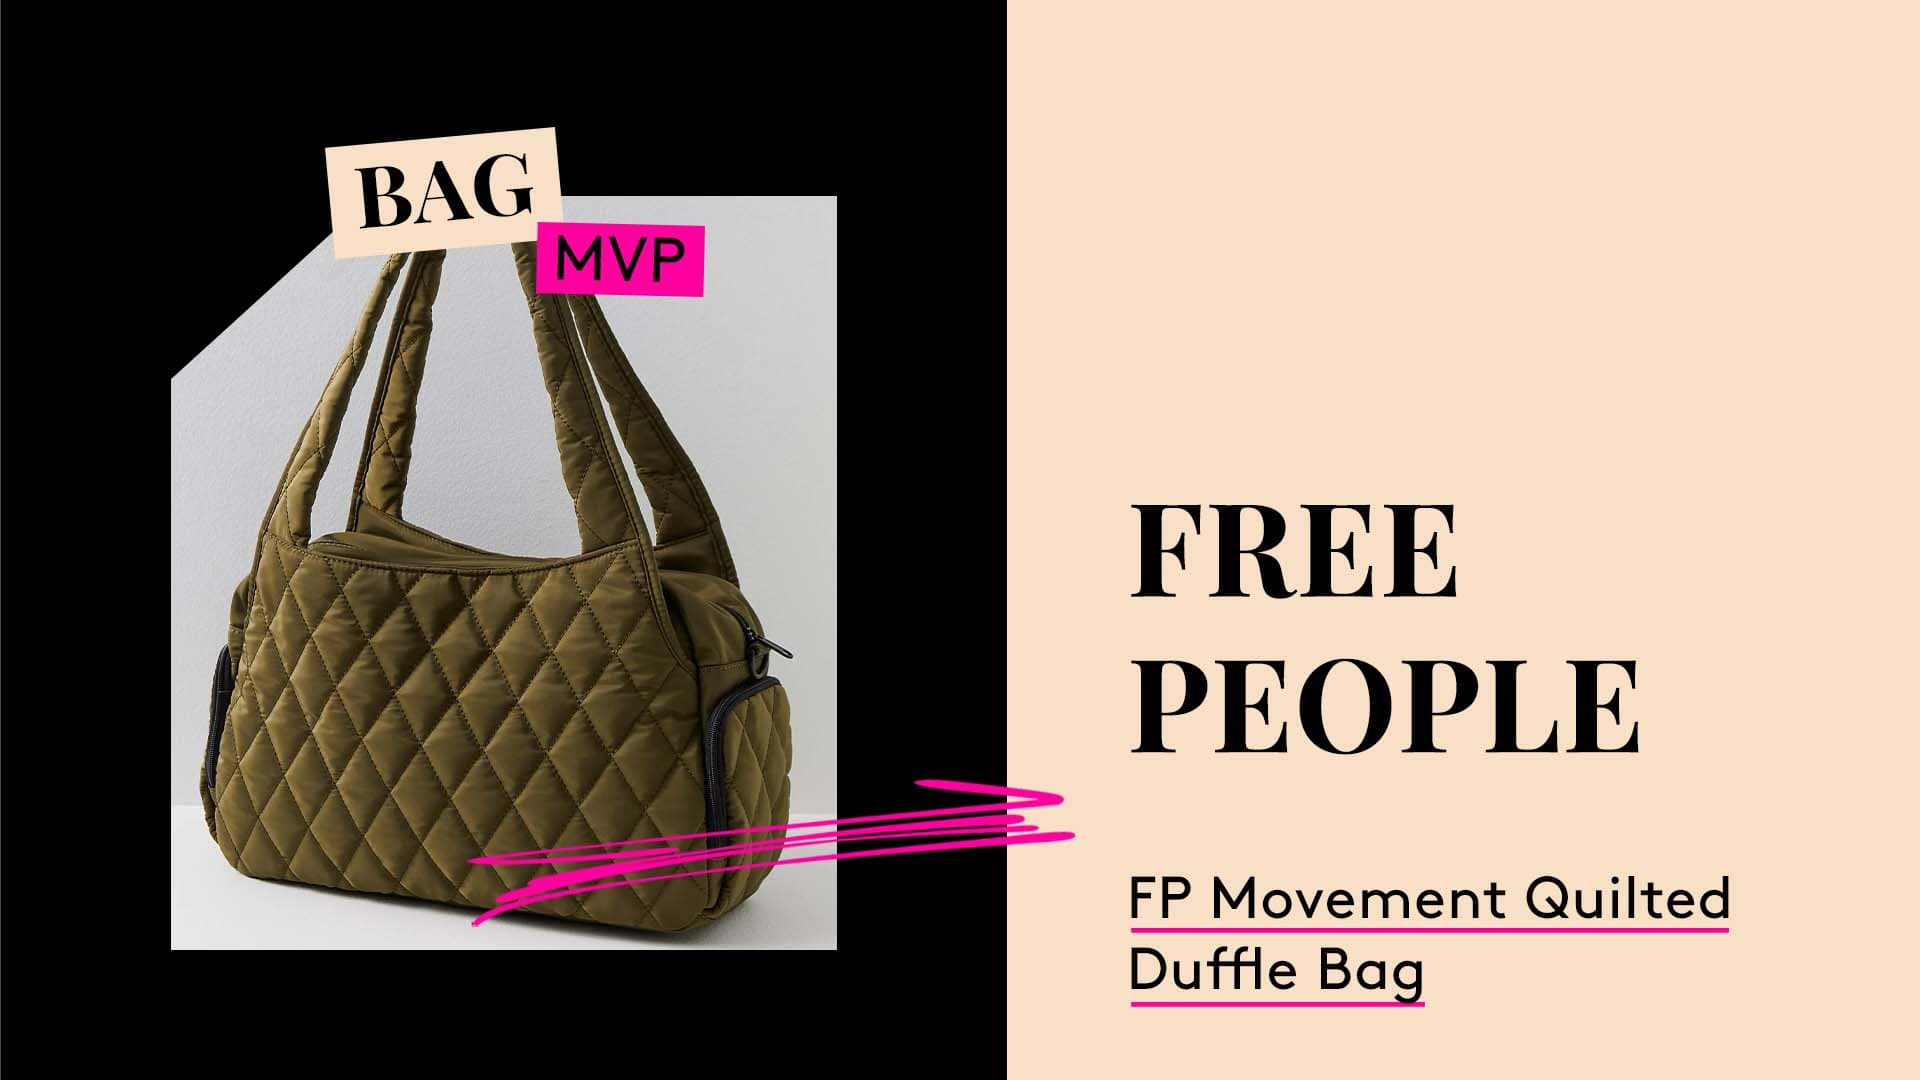 Bag MVP. FP Movement Quilted Duffle Bag.